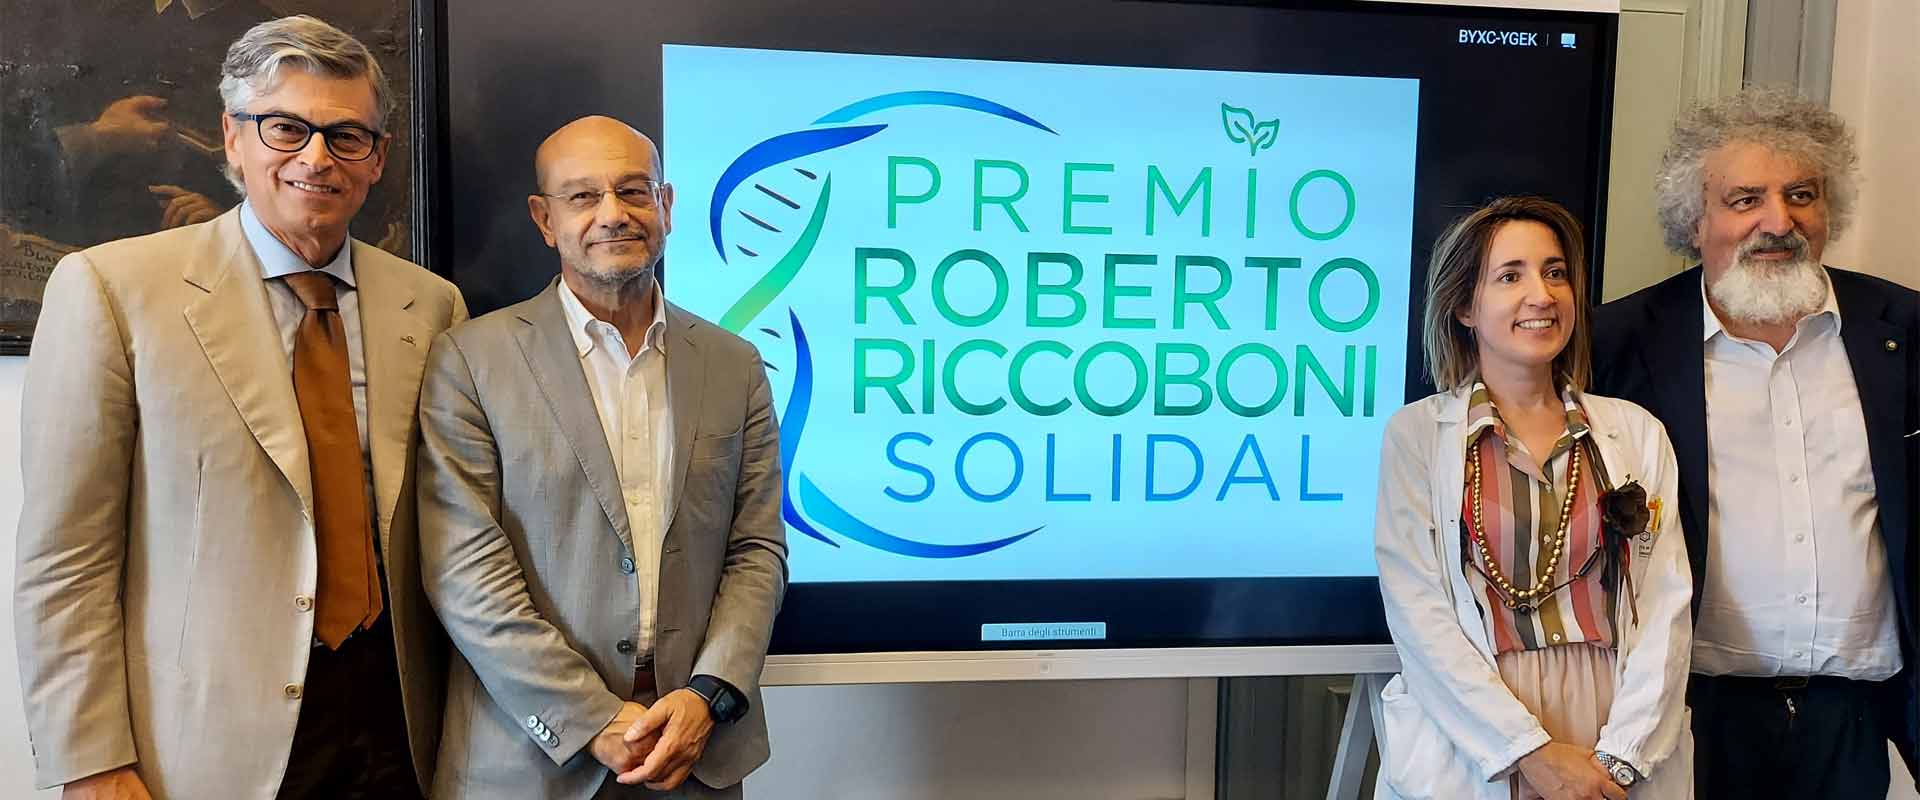 The Roberto Riccoboni Solidal Award was founded to support research